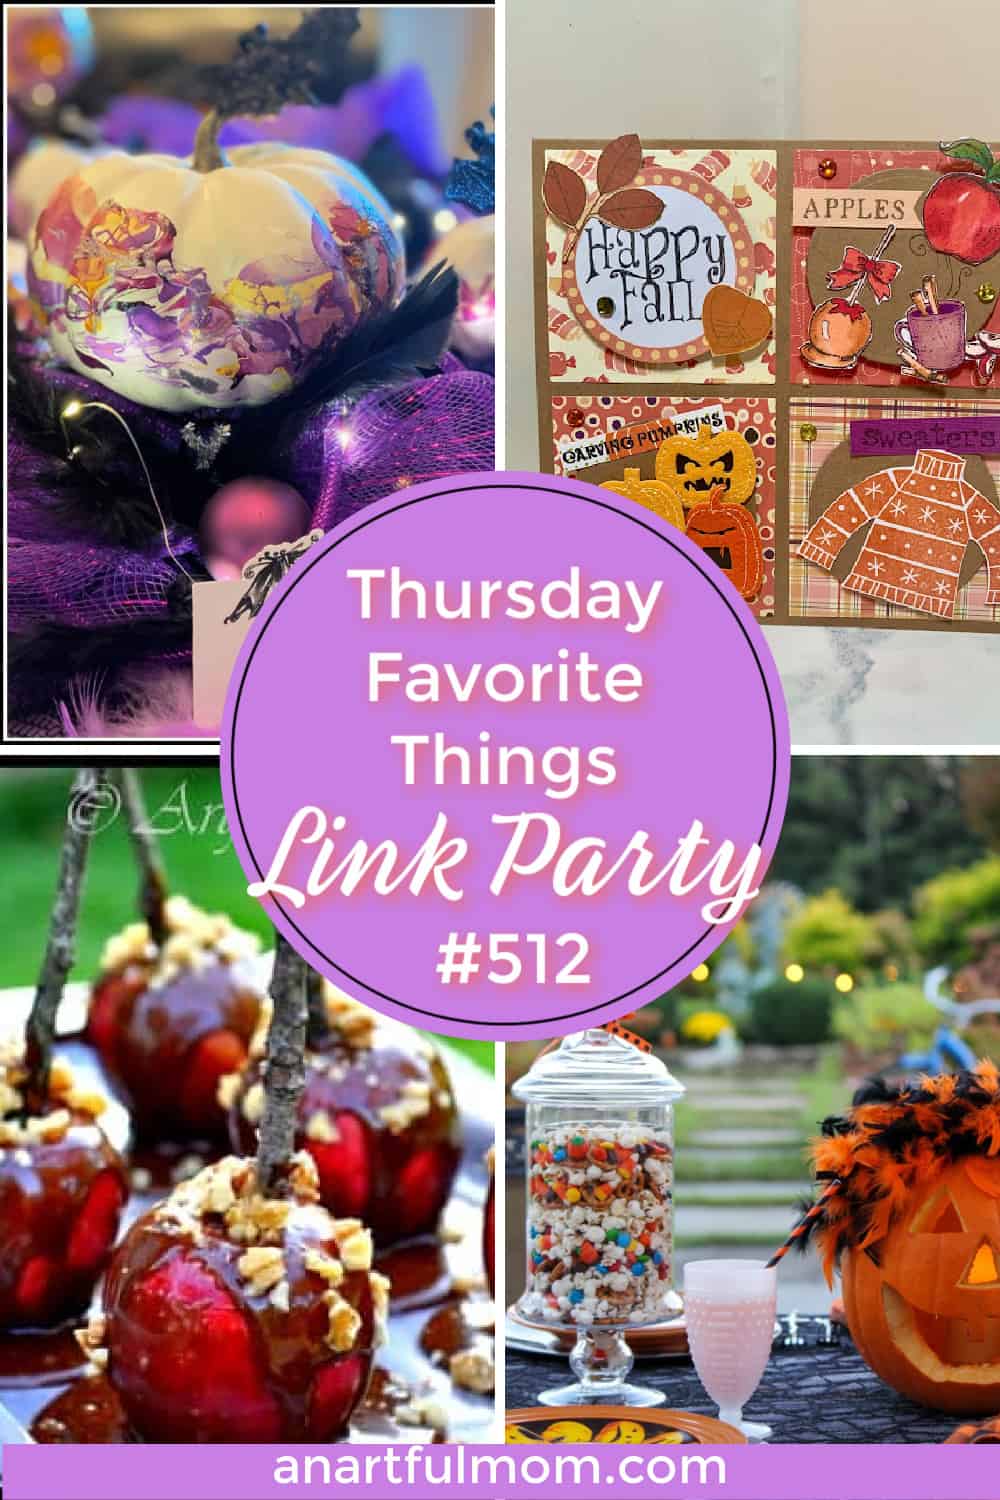 Thursday Favorite Things Link Party #512: Happy Fall!